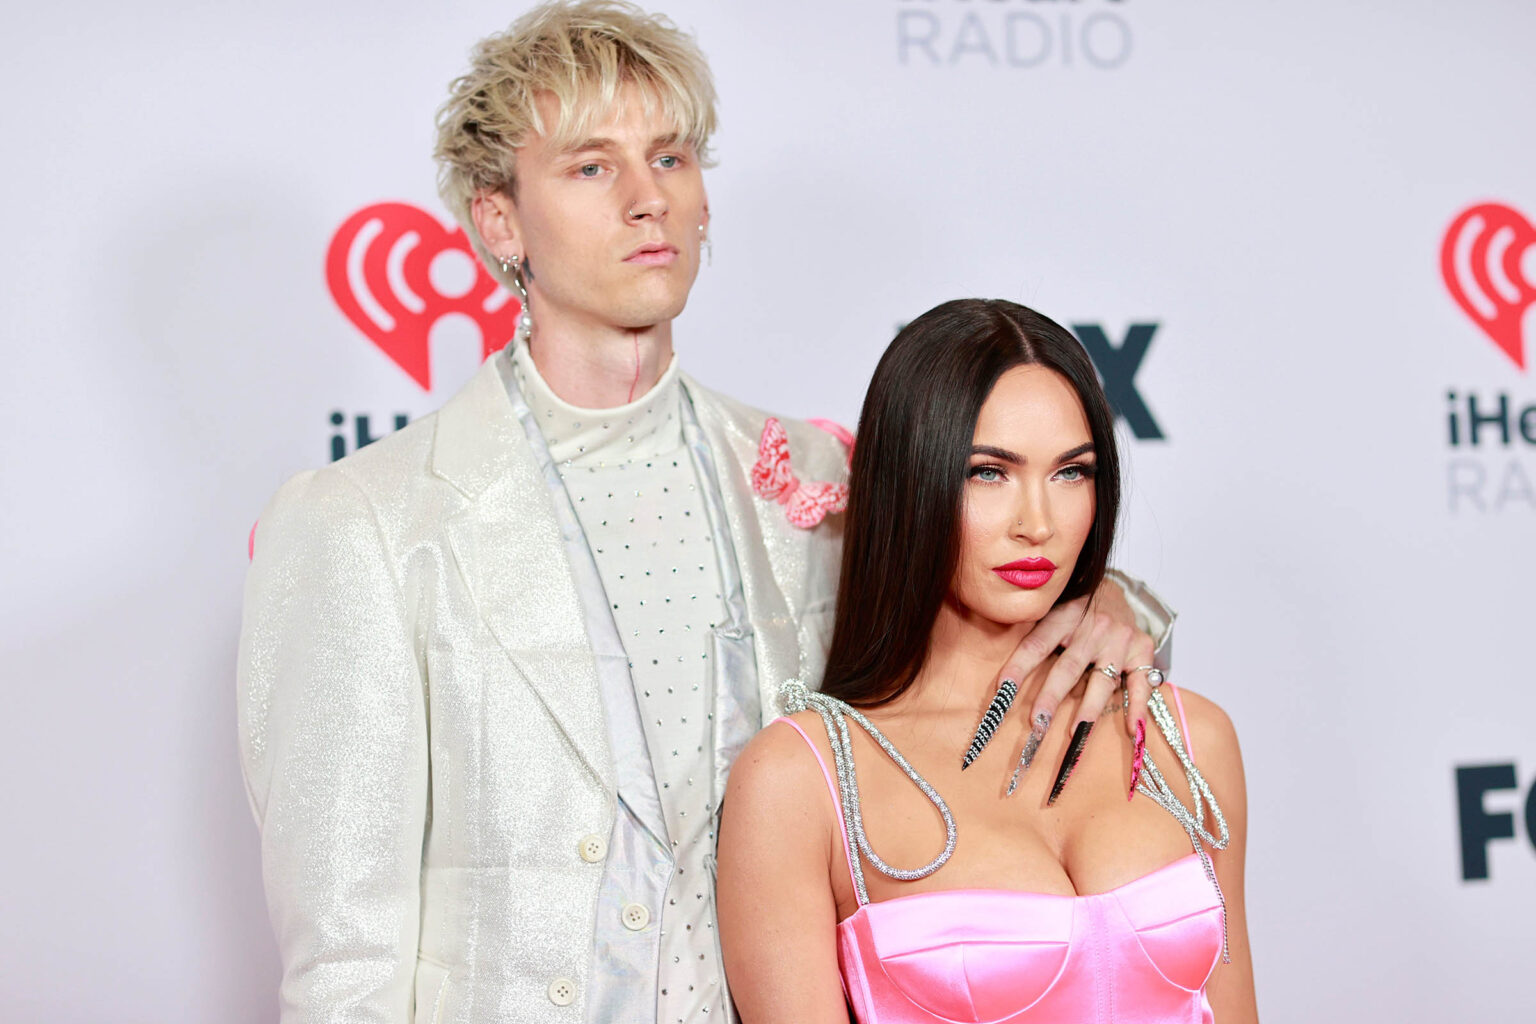 Did Machine Gun Kelly call members of Slipknot "weird old dudes" at a music festival? Dive into the details surrounding this bizarre beef!